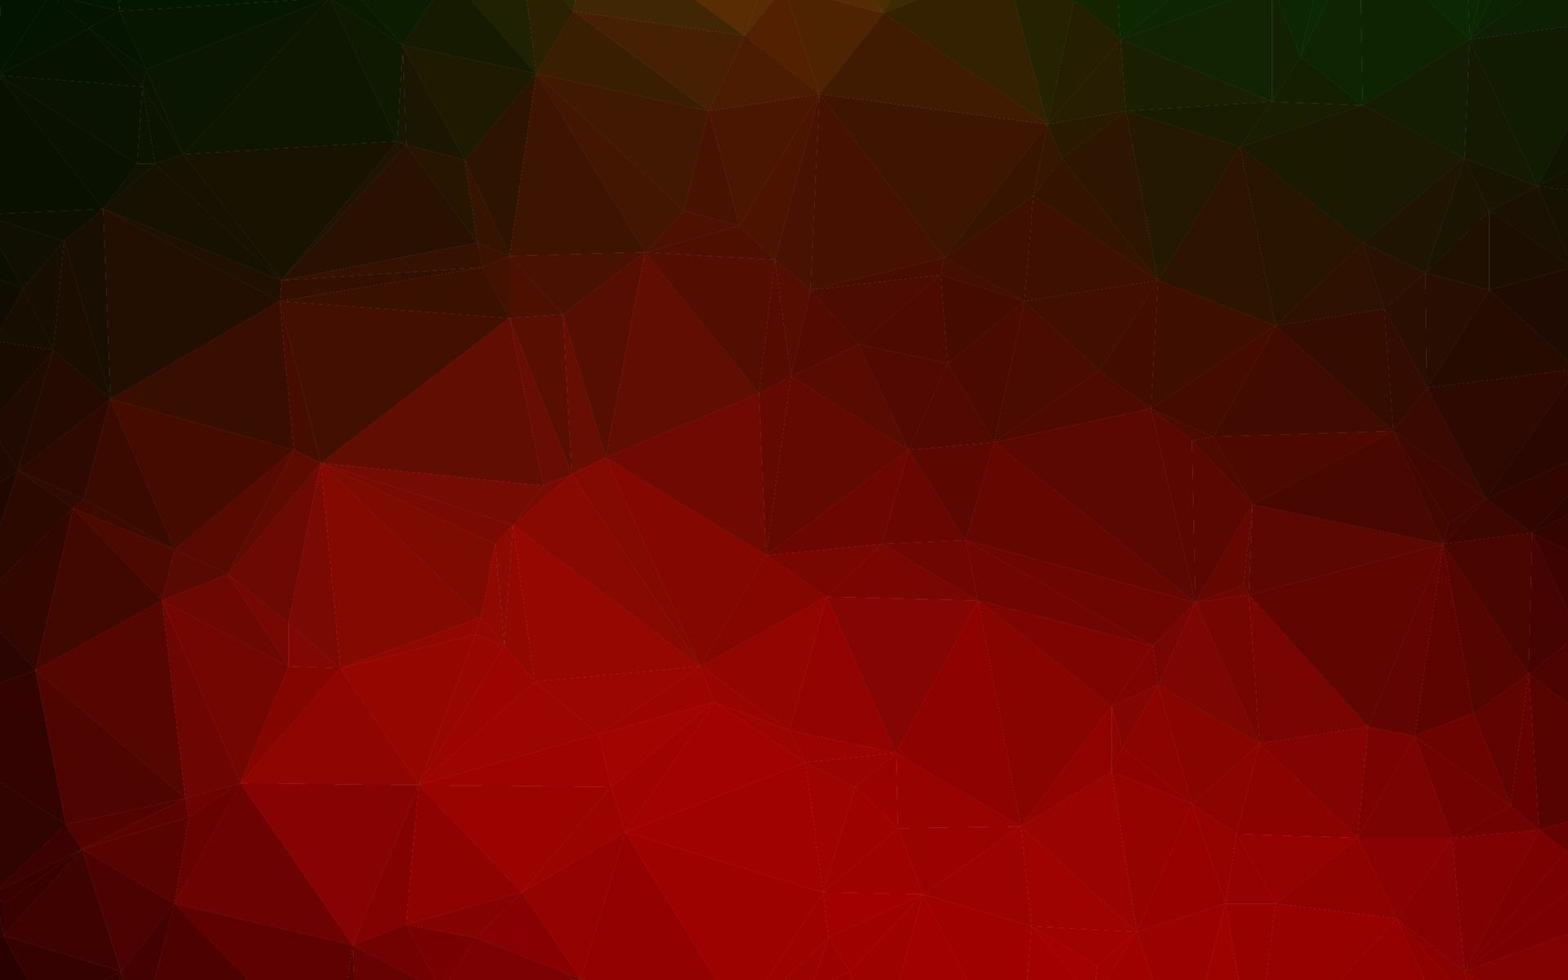 Light Green, Red vector polygonal background.